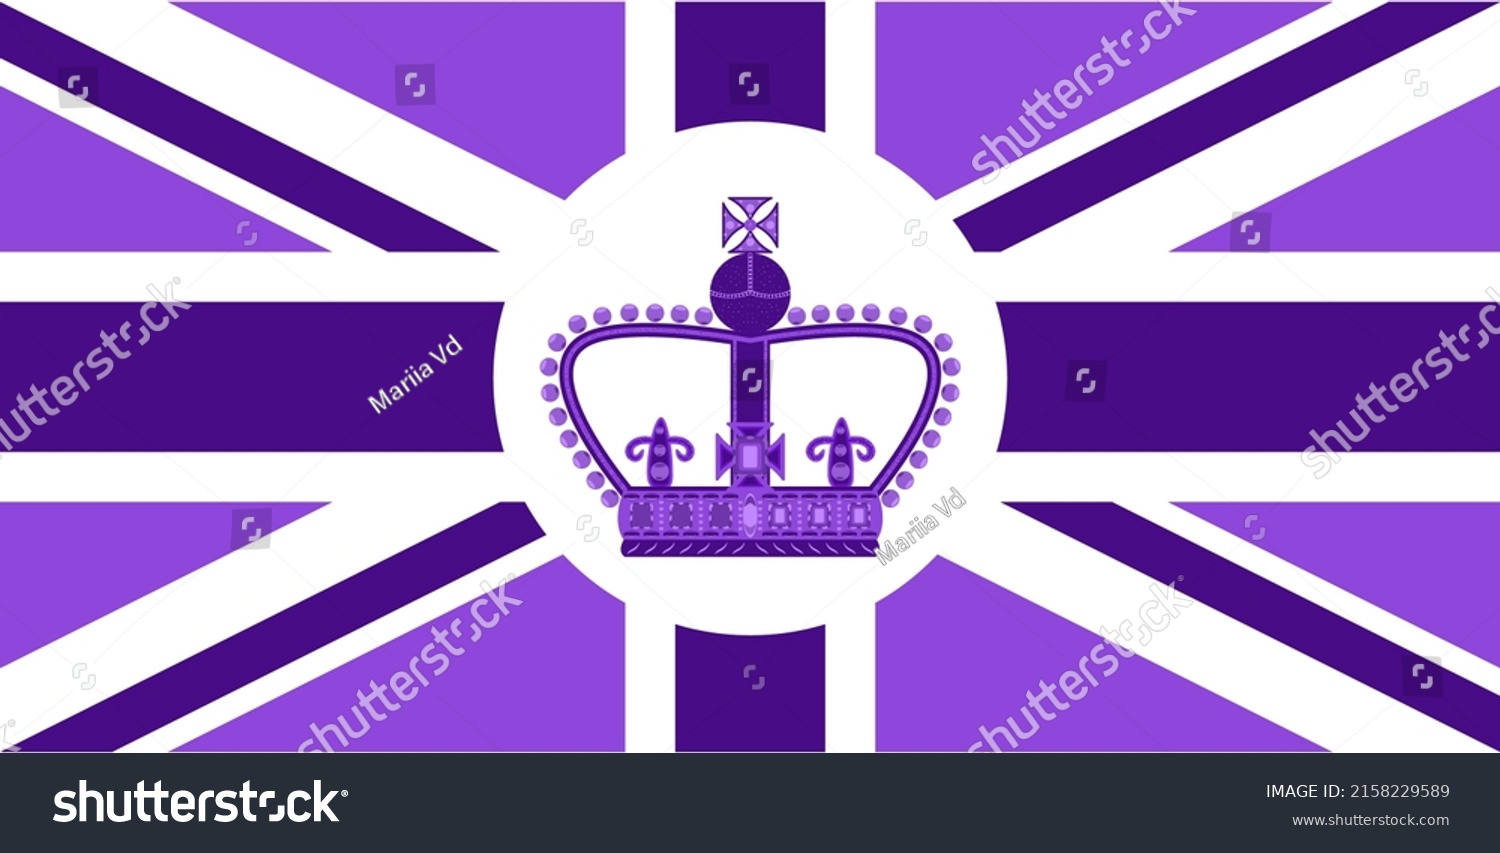 SVG of British flag in purple with emblem for 70 anniversary Queen on throne in UK. Poster with platinum jubilee symbol. Purple banner template or card. svg